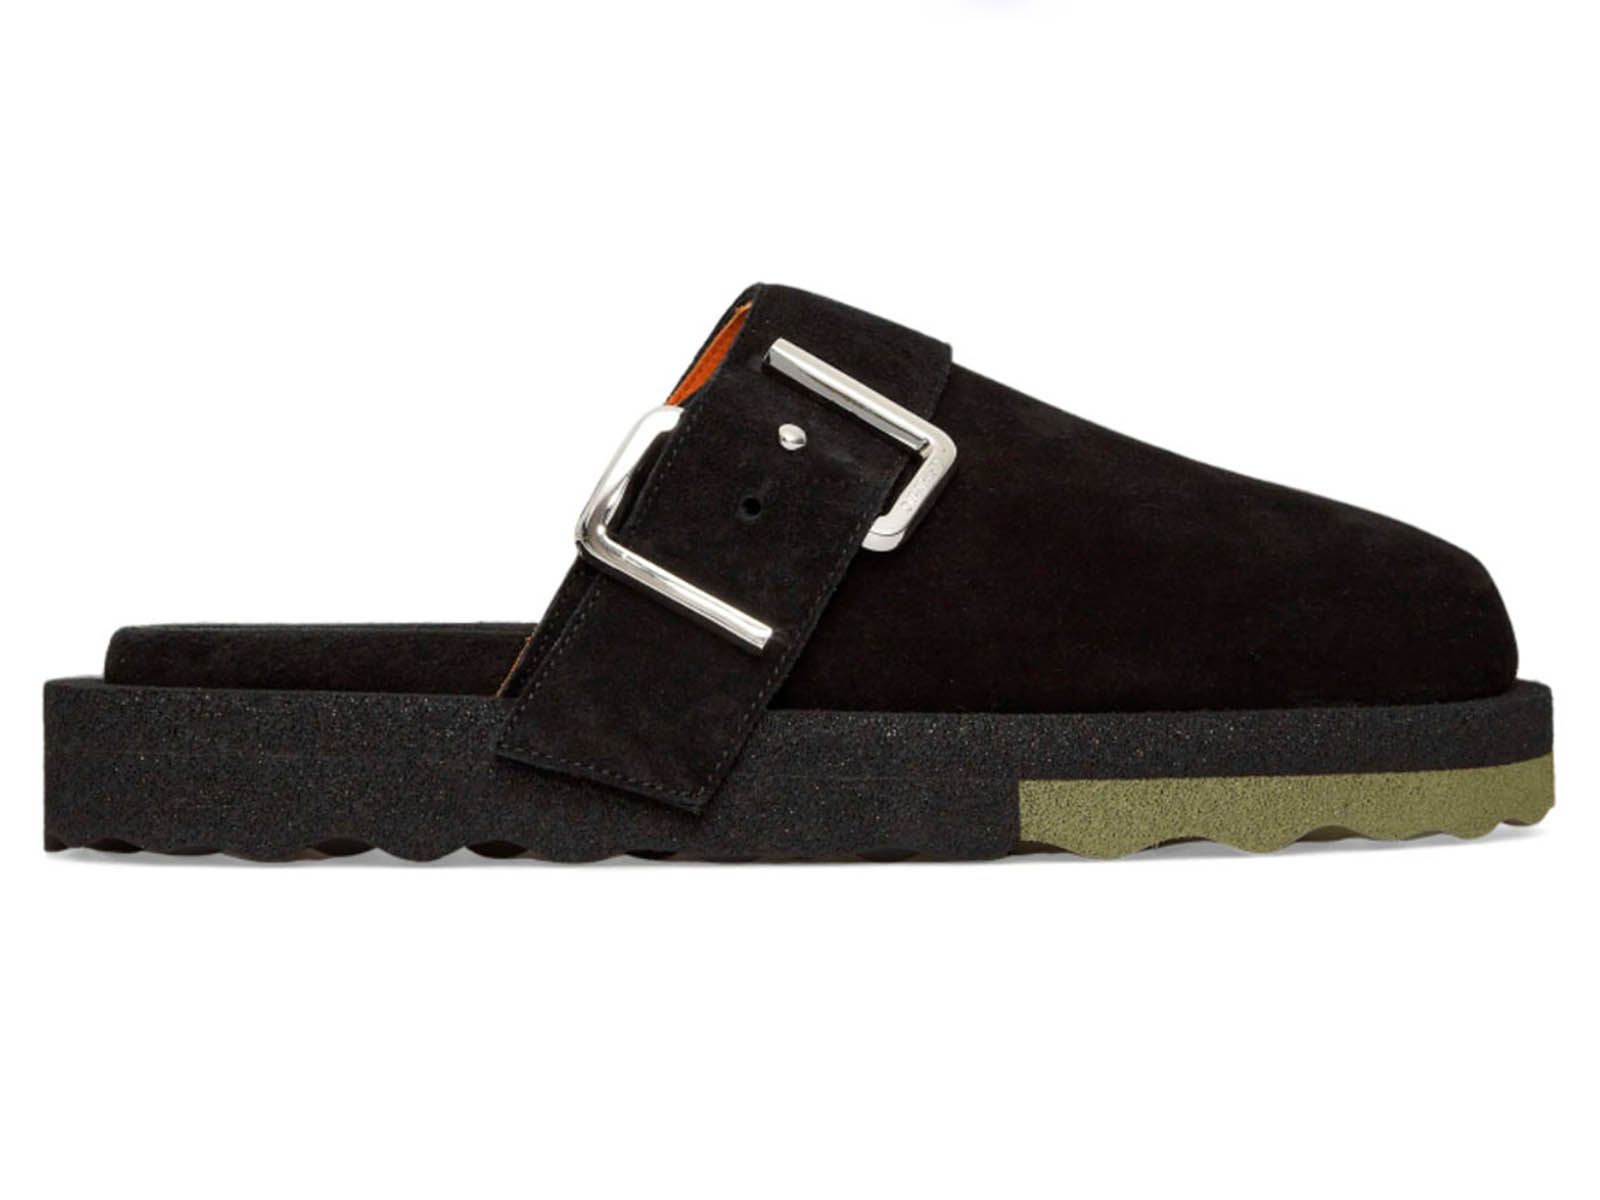 Off-White launches its new mules for this summer